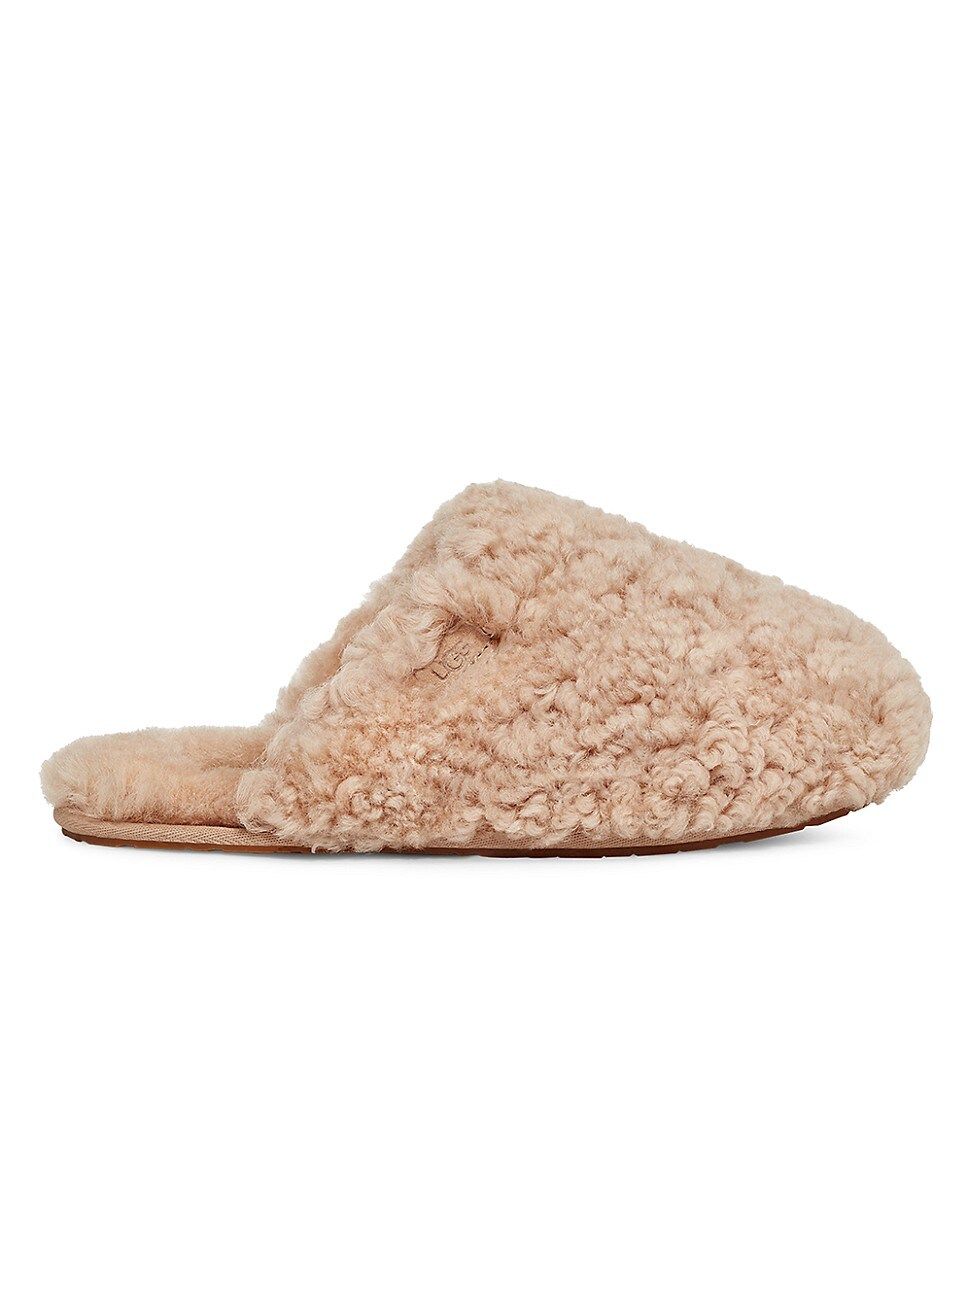 Women's Maxi Curly Shearling Slides - Sand - Size 6 Sandals | Saks Fifth Avenue